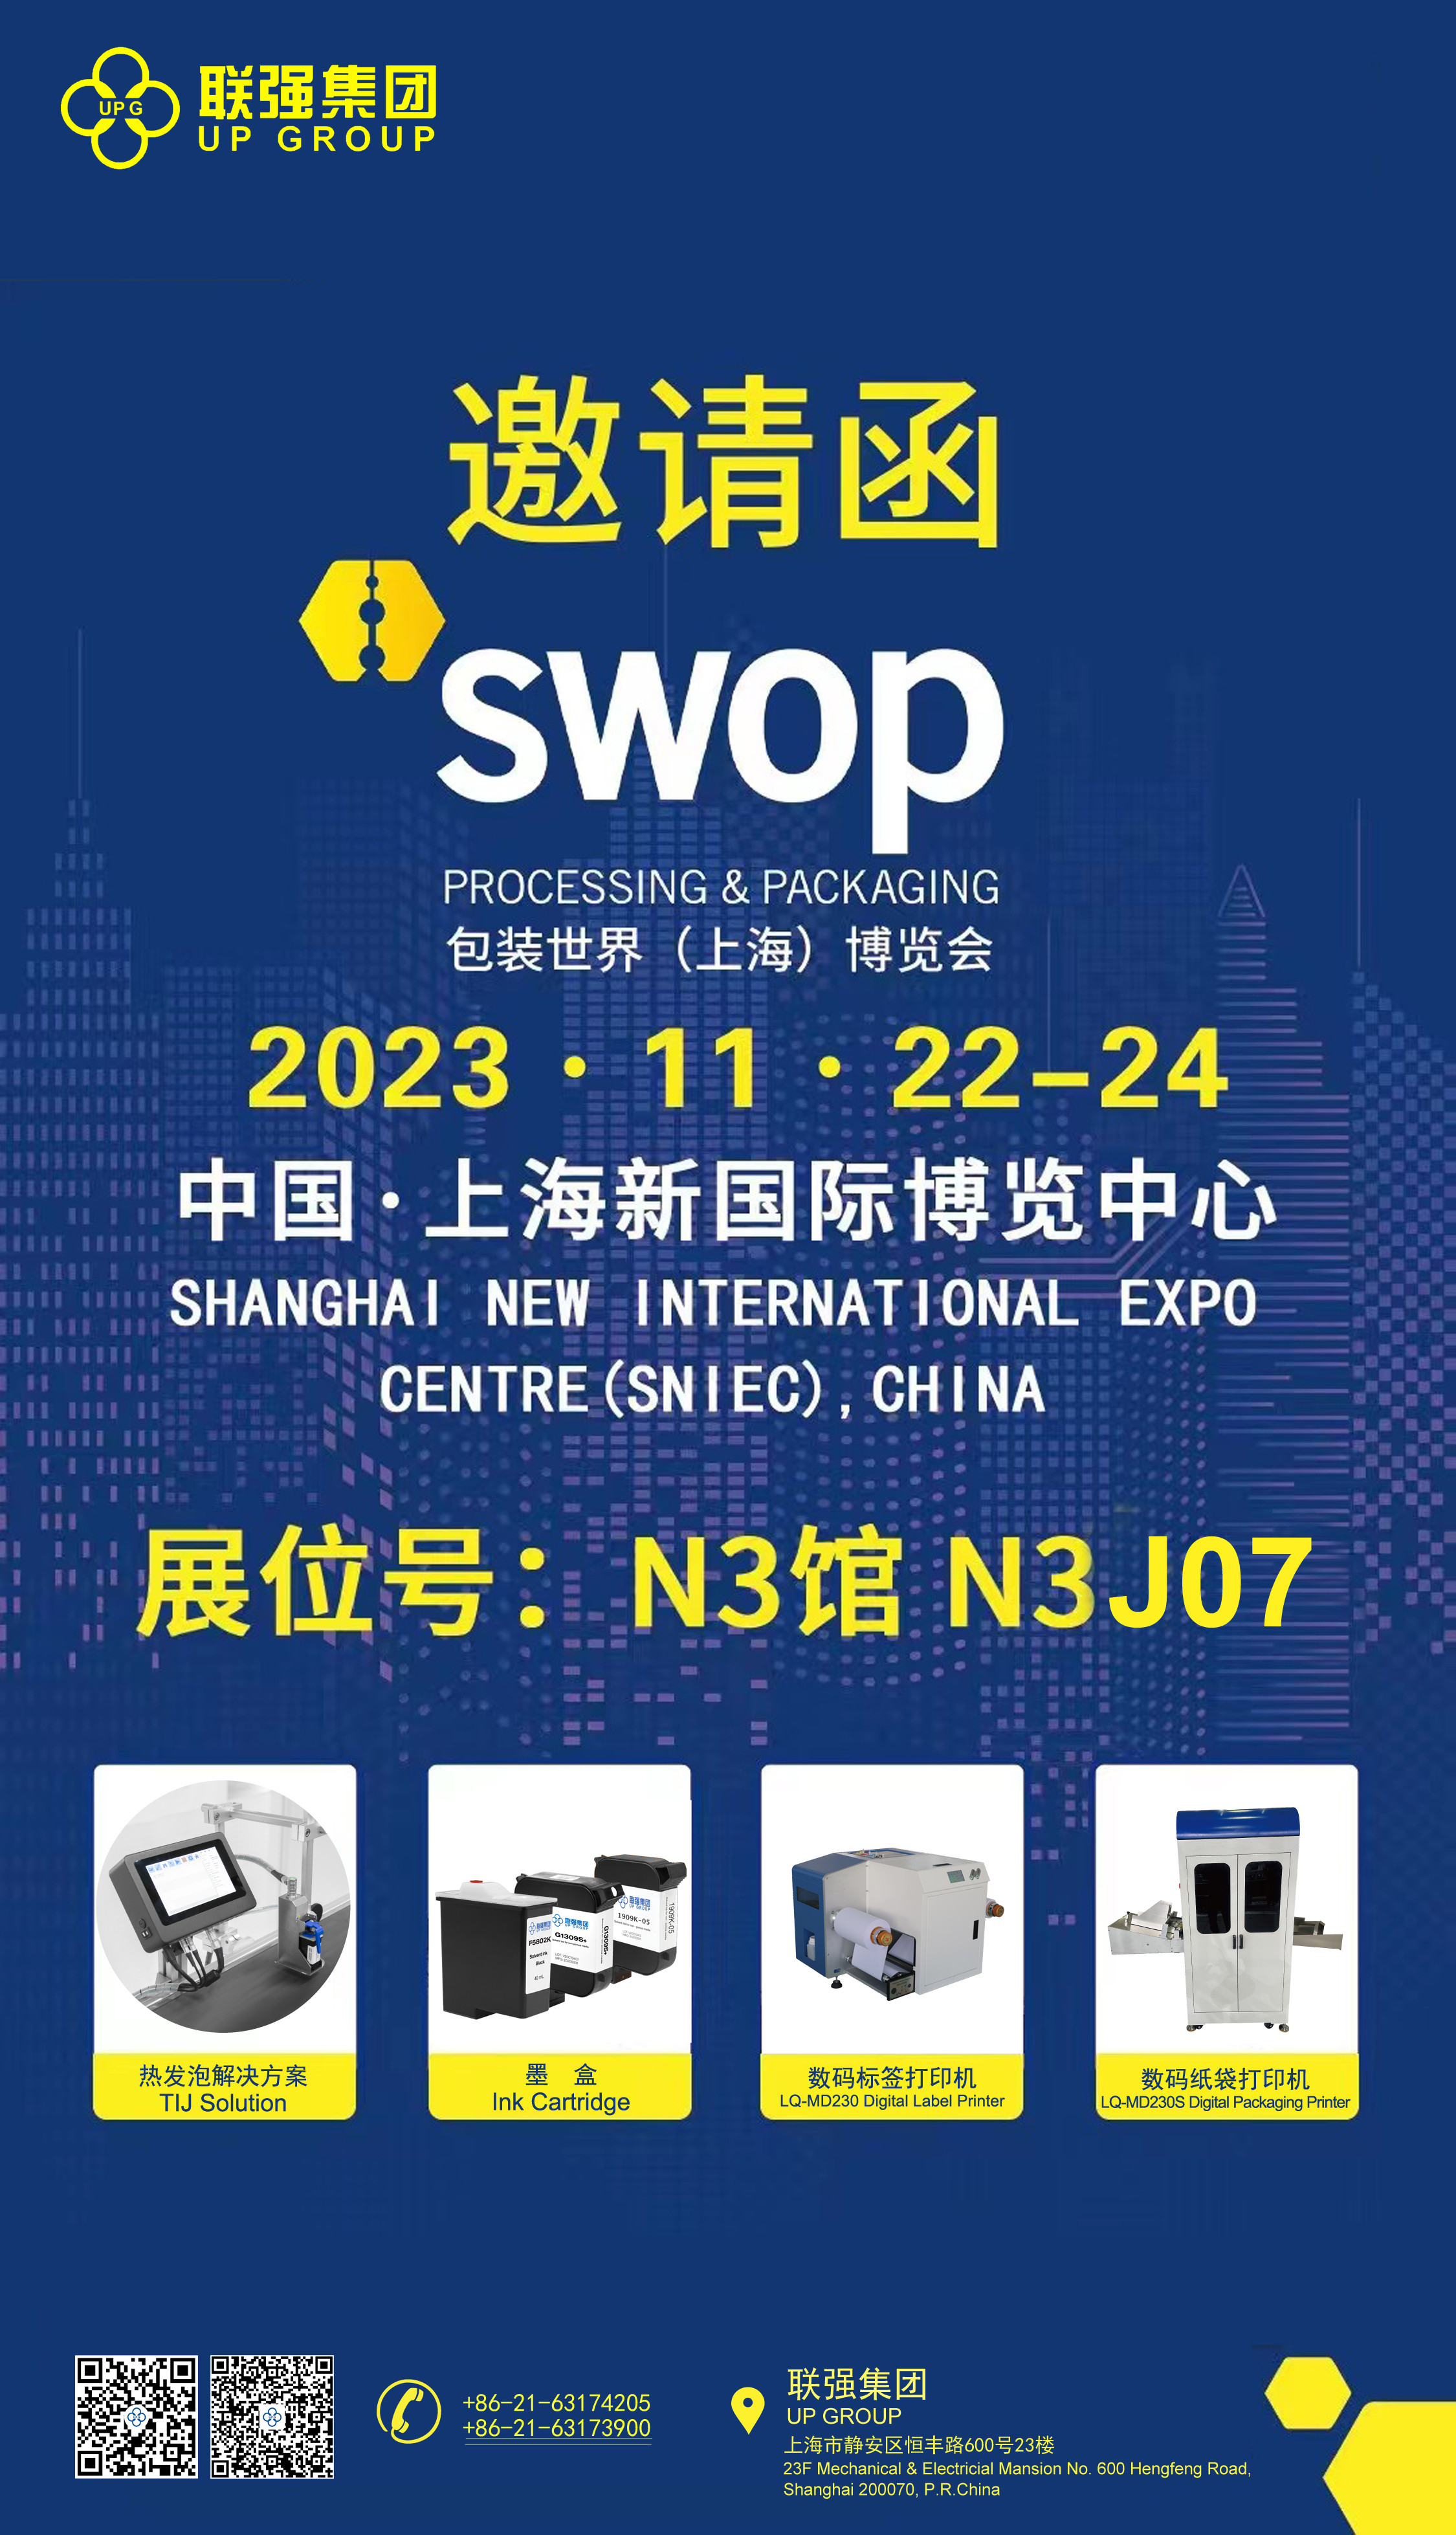 Welcome to visit us in SWOP Shanghai Expo